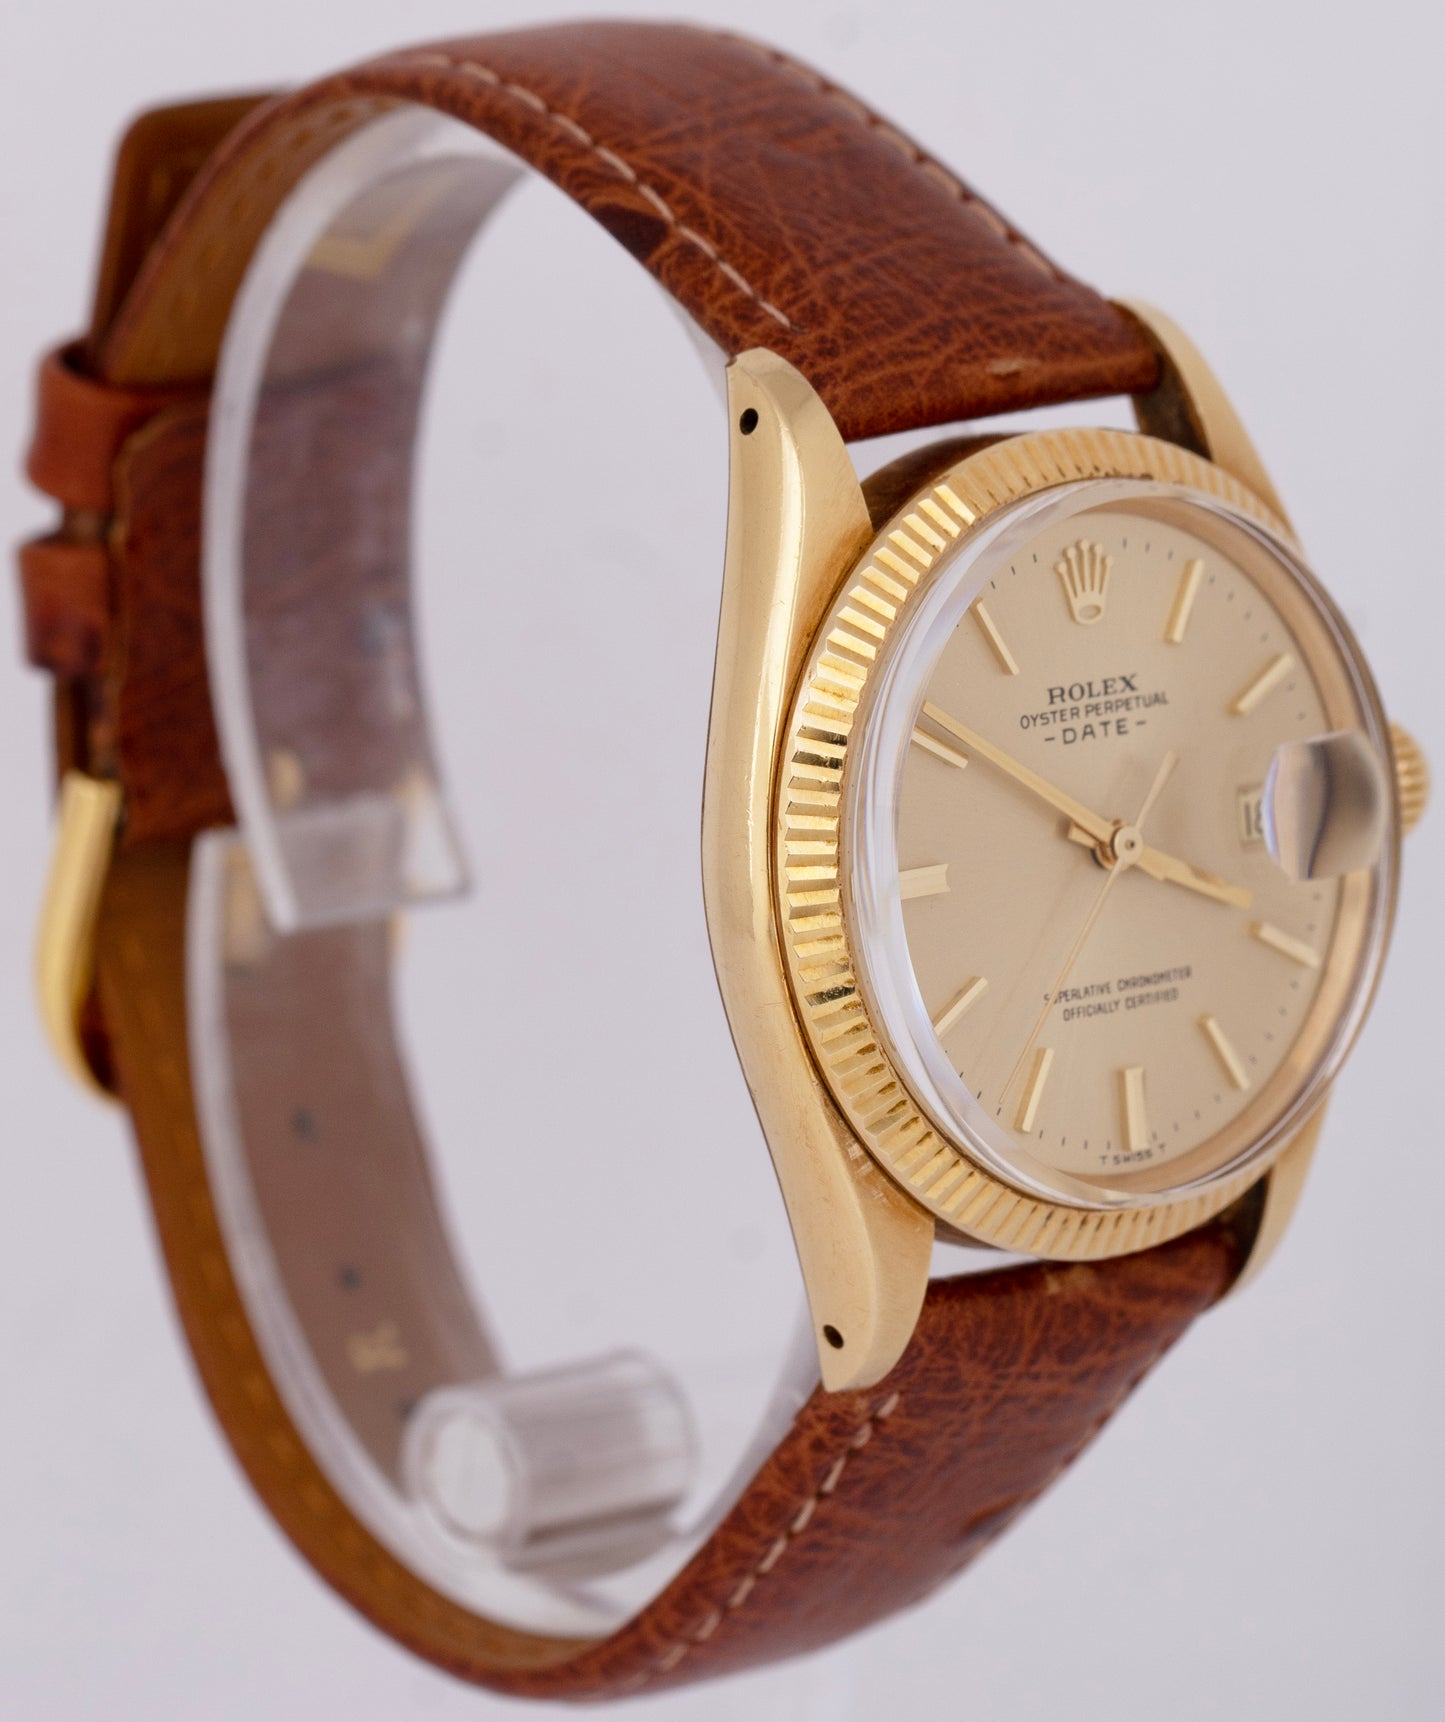 1971 Rolex Oyster Perpetual Date 34mm CHAMPAGNE 18K Yellow Gold Watch 1503